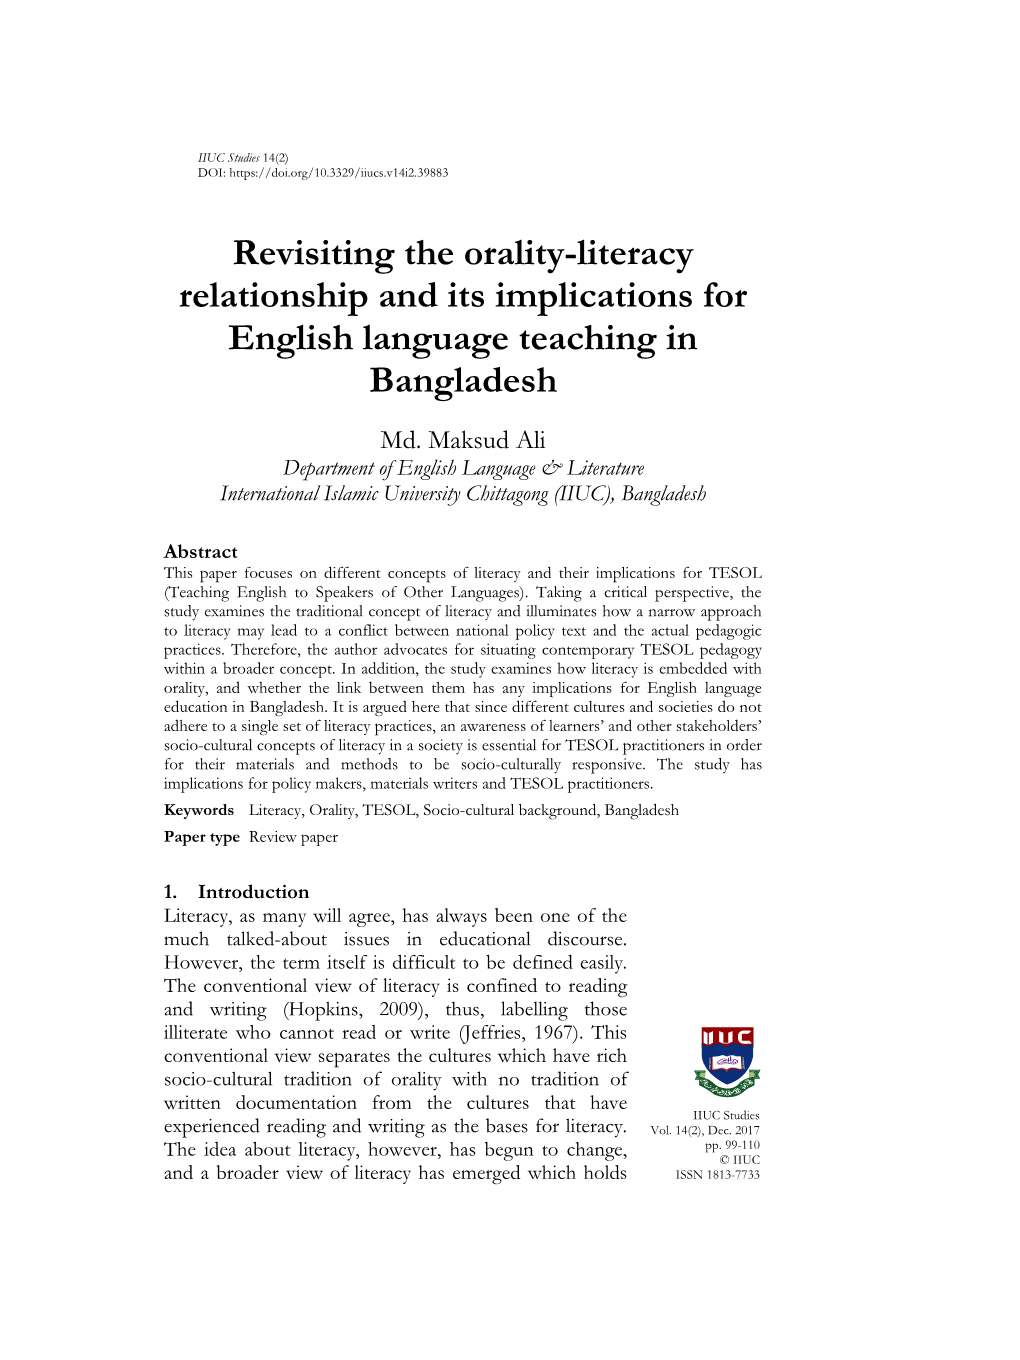 Revisiting the Orality-Literacy Relationship and Its Implications for English Language Teaching in Bangladesh